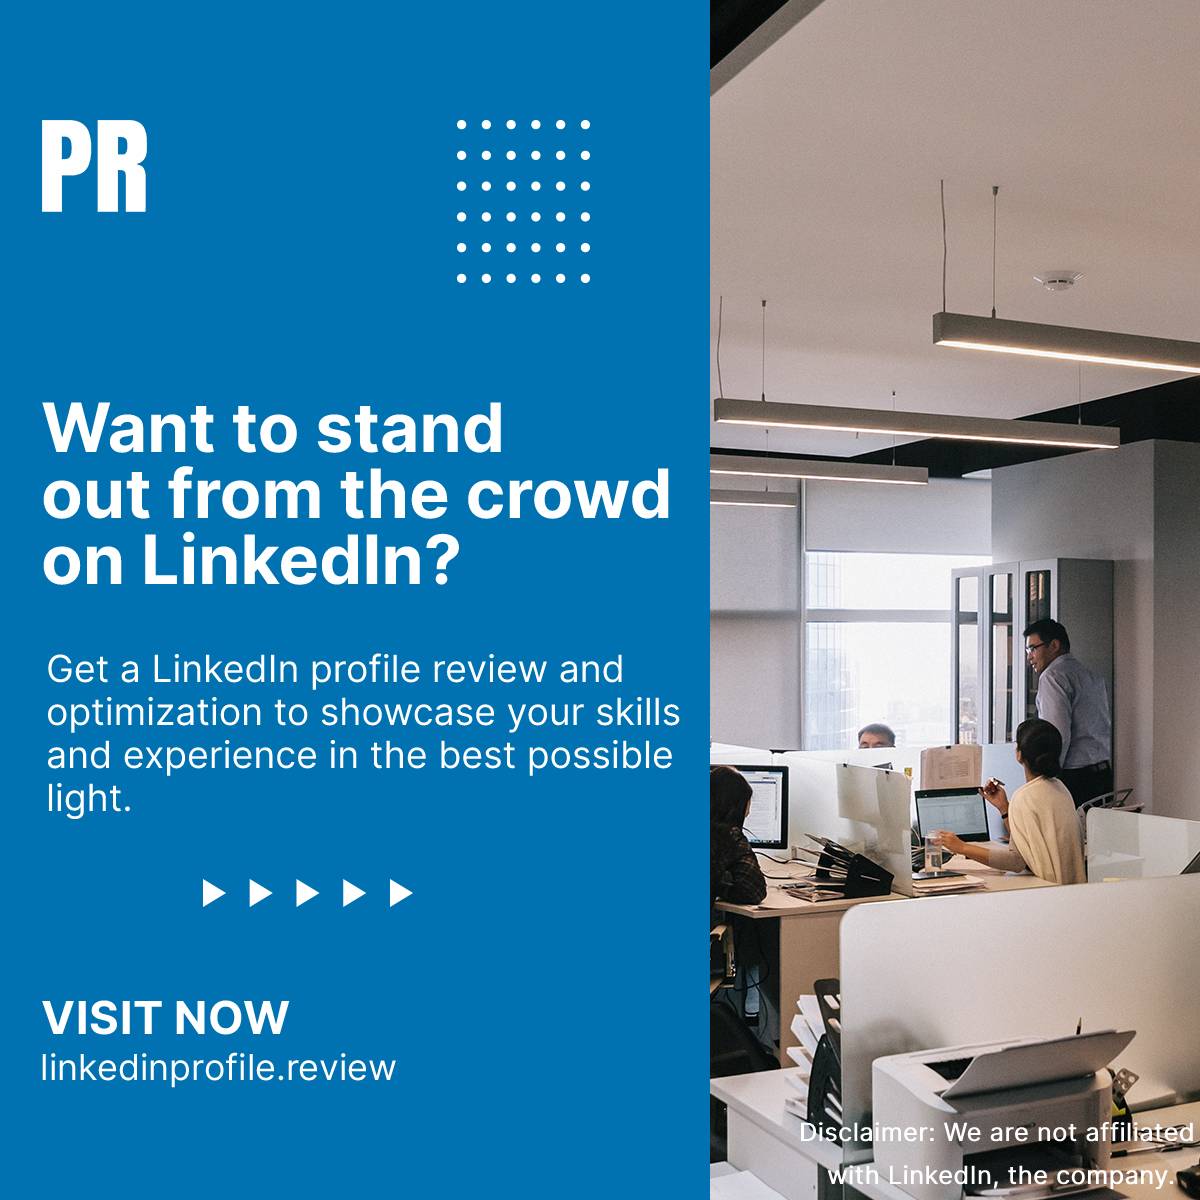 Your LinkedIn profile is often the first thing potential employers will see. Make sure it makes a great first impression by optimizing it!

#linkedinoptimization #linkedinhelp #careerboost #linkedinprofiles